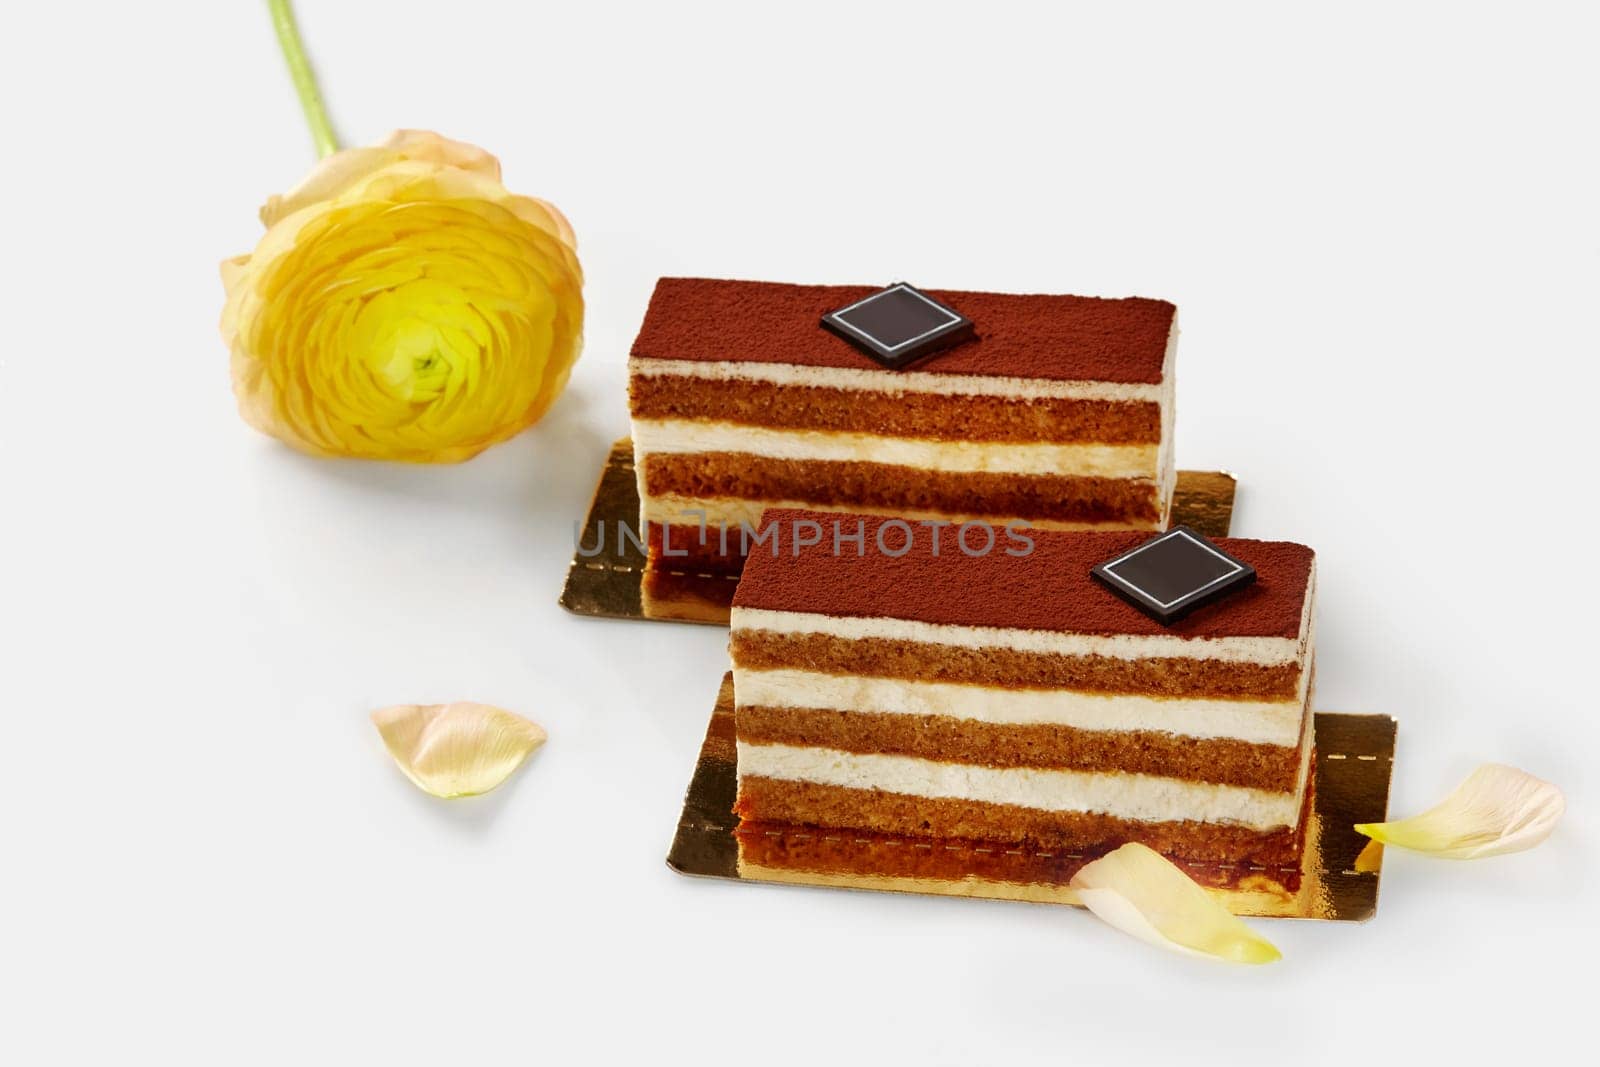 Light flavorful tiramisu slices with layers of moist coffee-soaked sponge and delicate mascarpone cream, sprinkled with cocoa presented on gold cardboards with yellow flower and petals on white